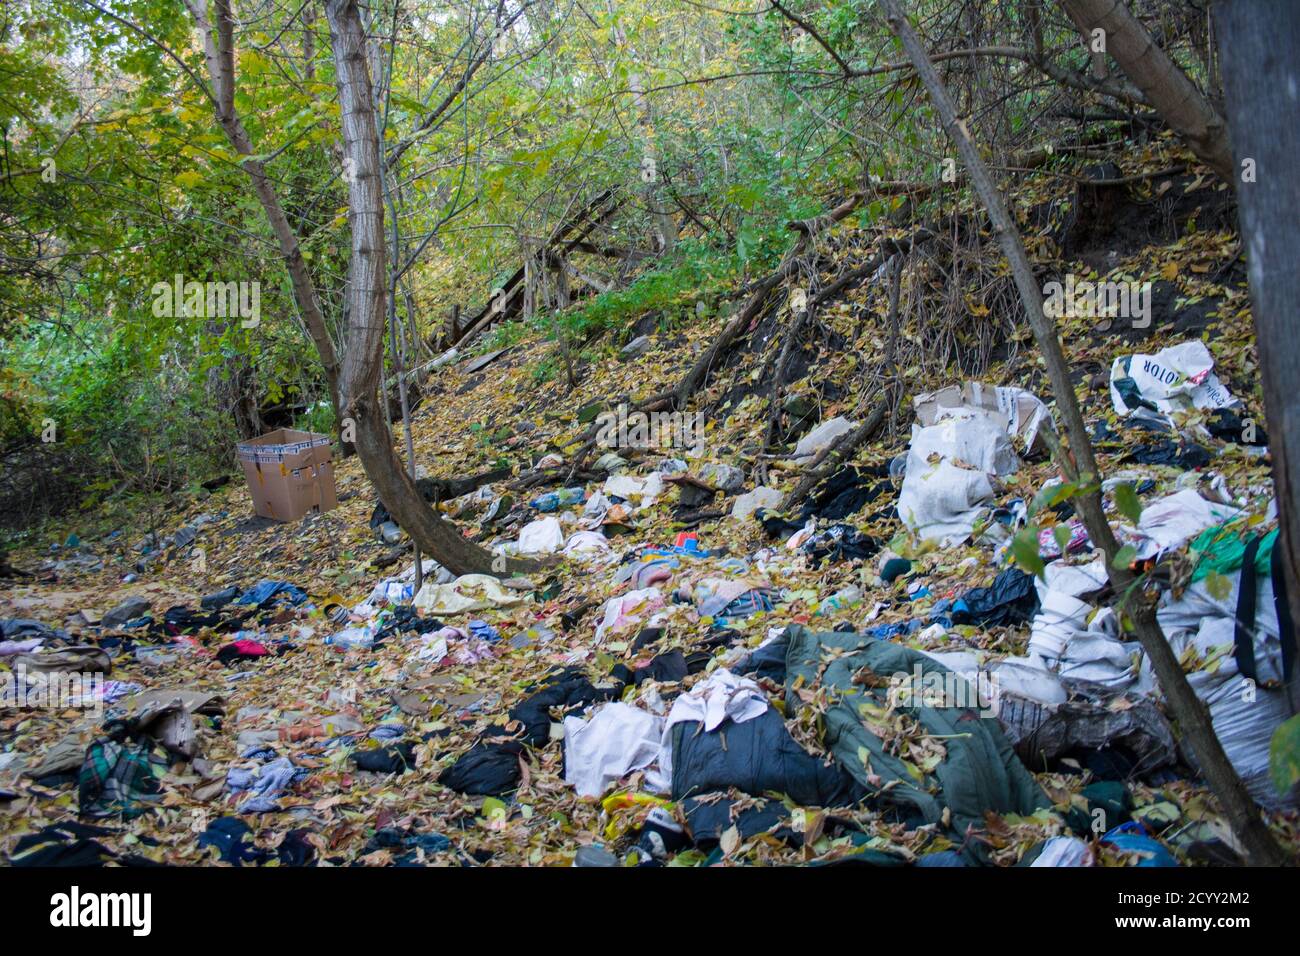 https://c8.alamy.com/comp/2CYY2M2/pile-of-domestic-garbage-on-the-ground-among-green-trees-2CYY2M2.jpg